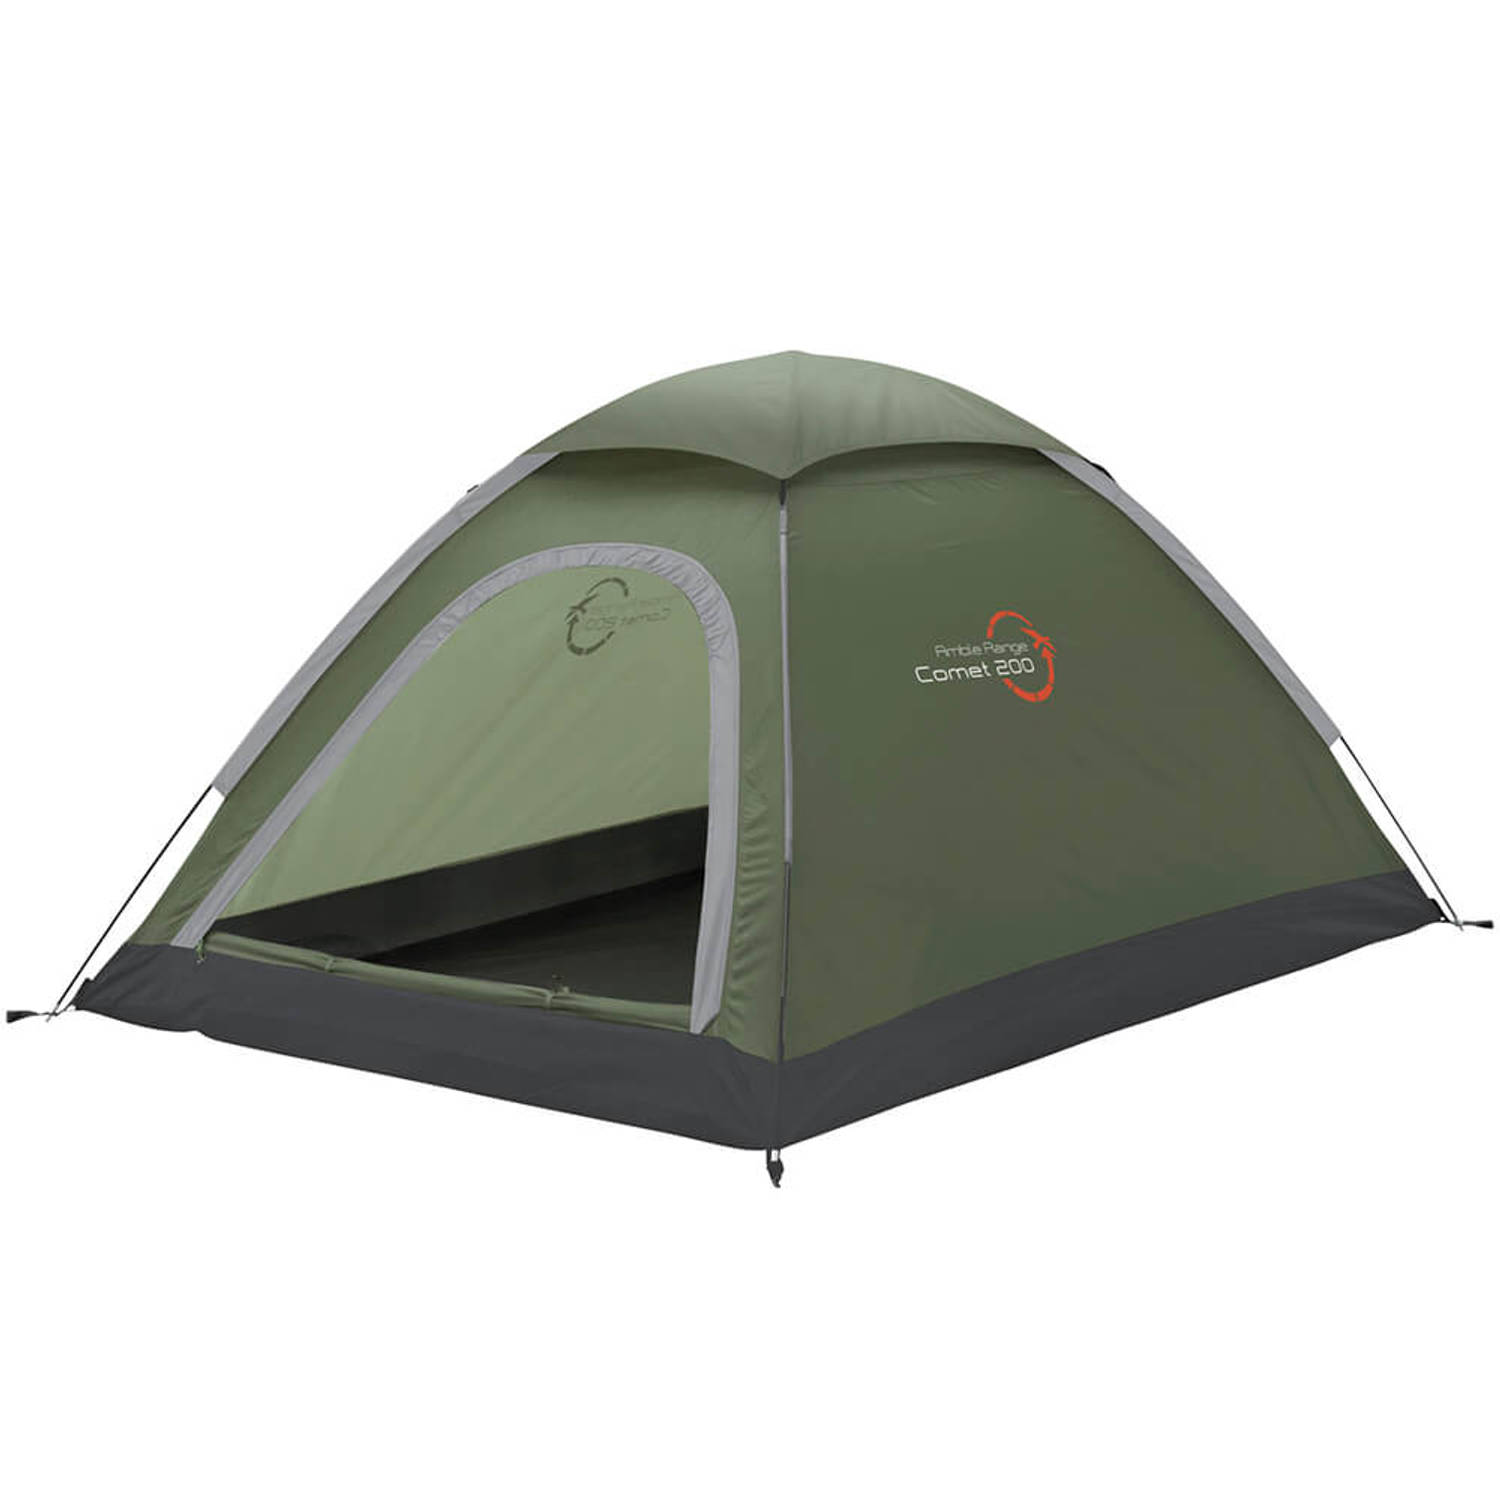 Easy Camp Easy Camp Comet 200 tent